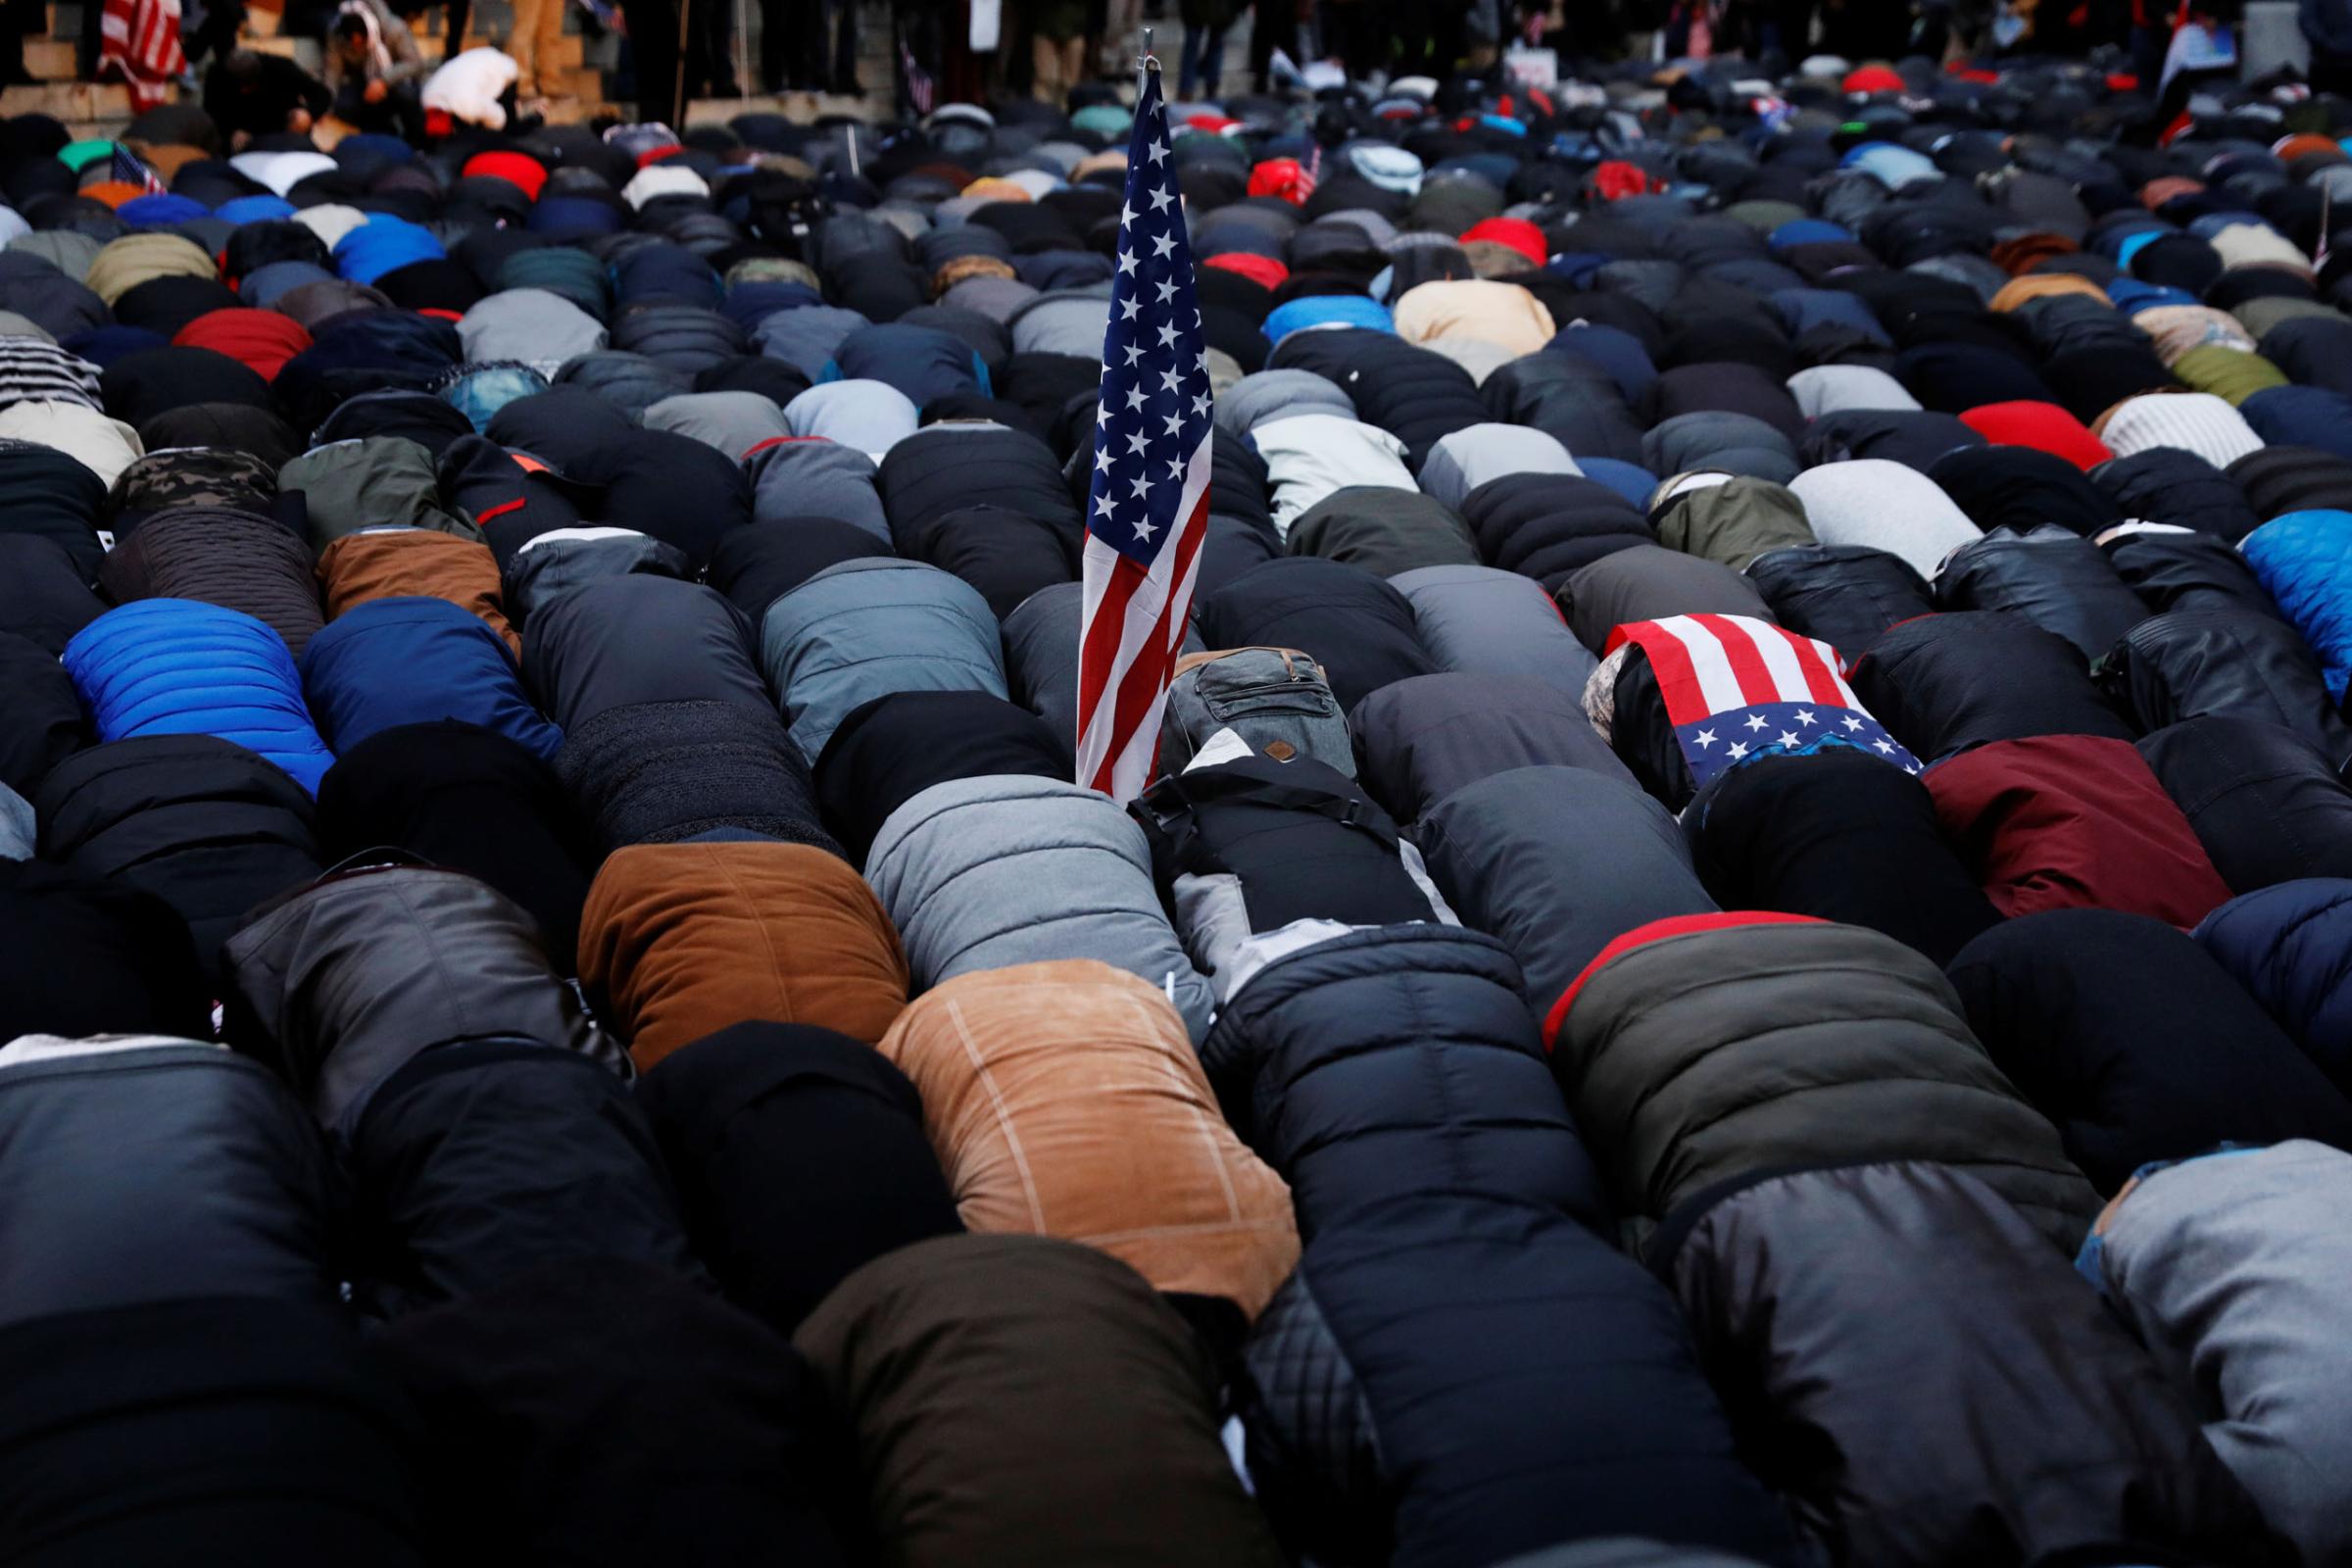 Demonstrators pray as they participate in a protest by the Yemeni community against U.S. President Donald Trump's travel ban in the Brooklyn borough of New York